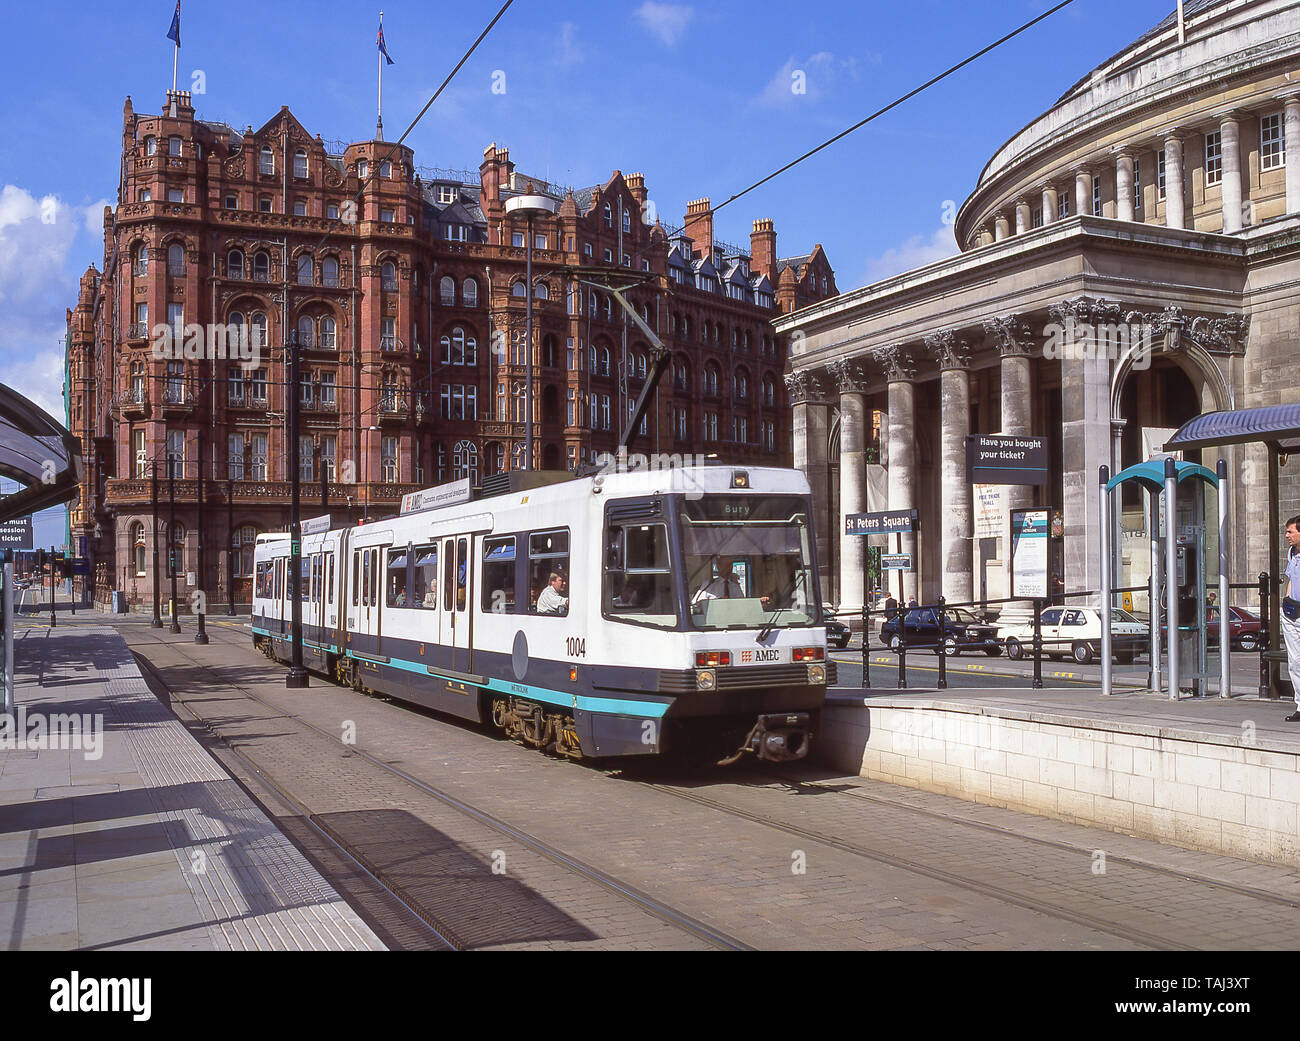 Manchester Metrolink tram, St Peter's Square, Manchester, Greater Manchester, England, United Kingdom Stock Photo